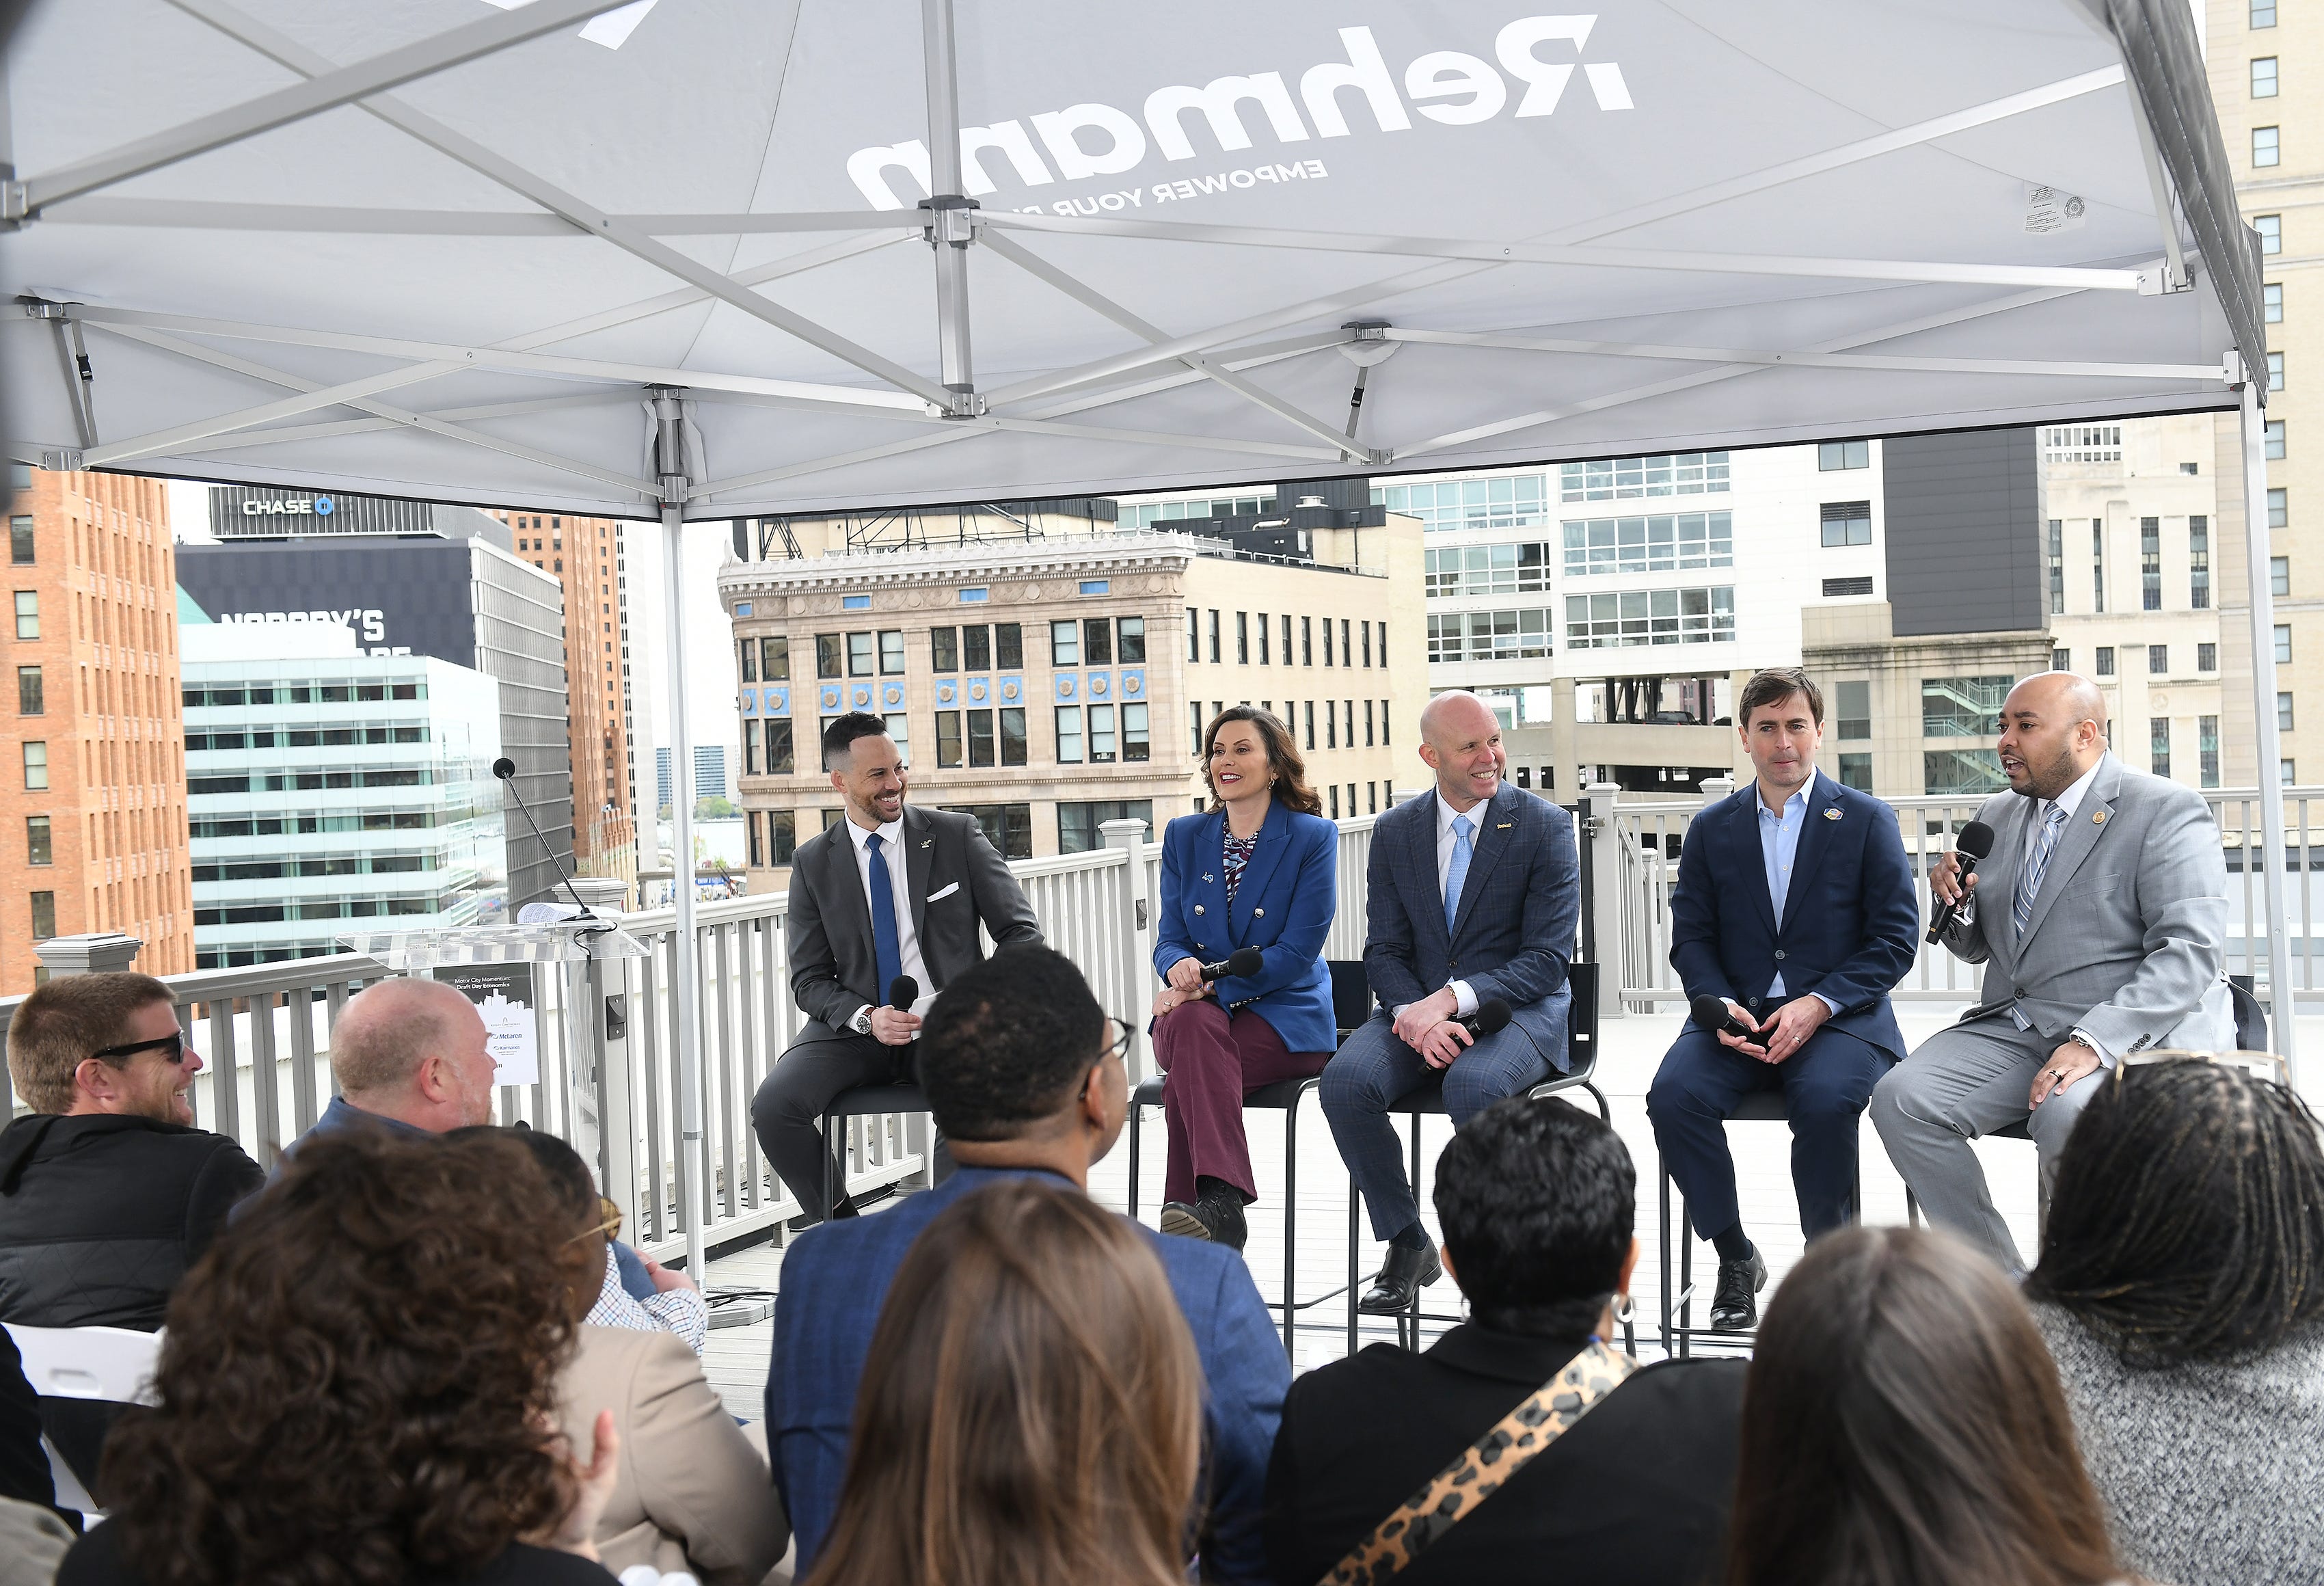 From left, Michigan Association of Broadcasters president Sam Klemet leads a discussion Wednesday about the economic impact of the NFL Draft in Detroit with Gov. Gretchen Whitmer, Visit Detroit president and CEO Claude Molinari, NFL Club Business, International and League Events vice president Peter O’Reilly and Detroit city councilman Fred Durhal III on the rooftop of a building on Griswold.